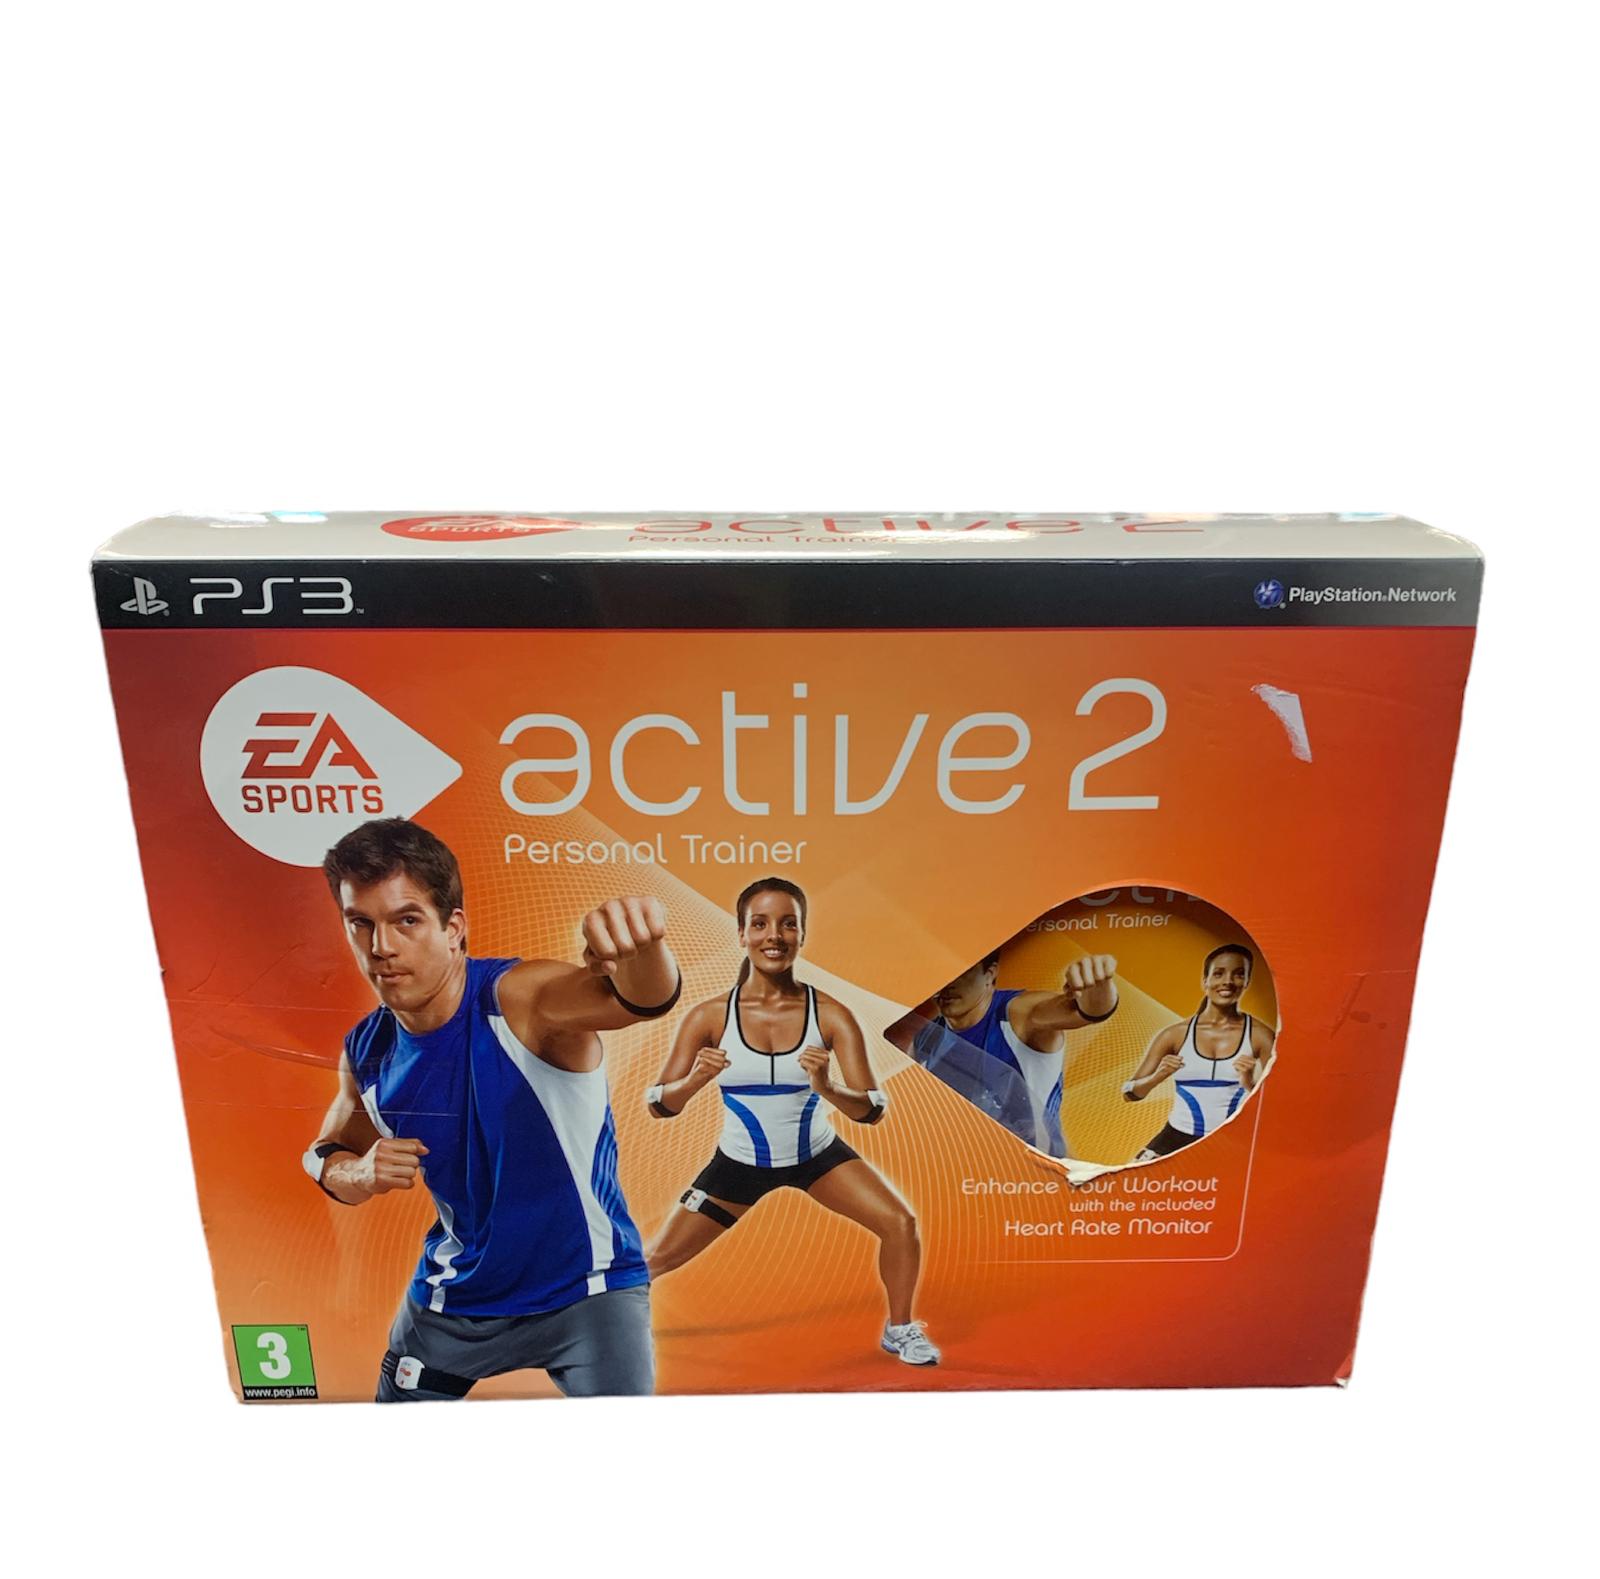 PS3 EA Active 2 Personal Trainer 